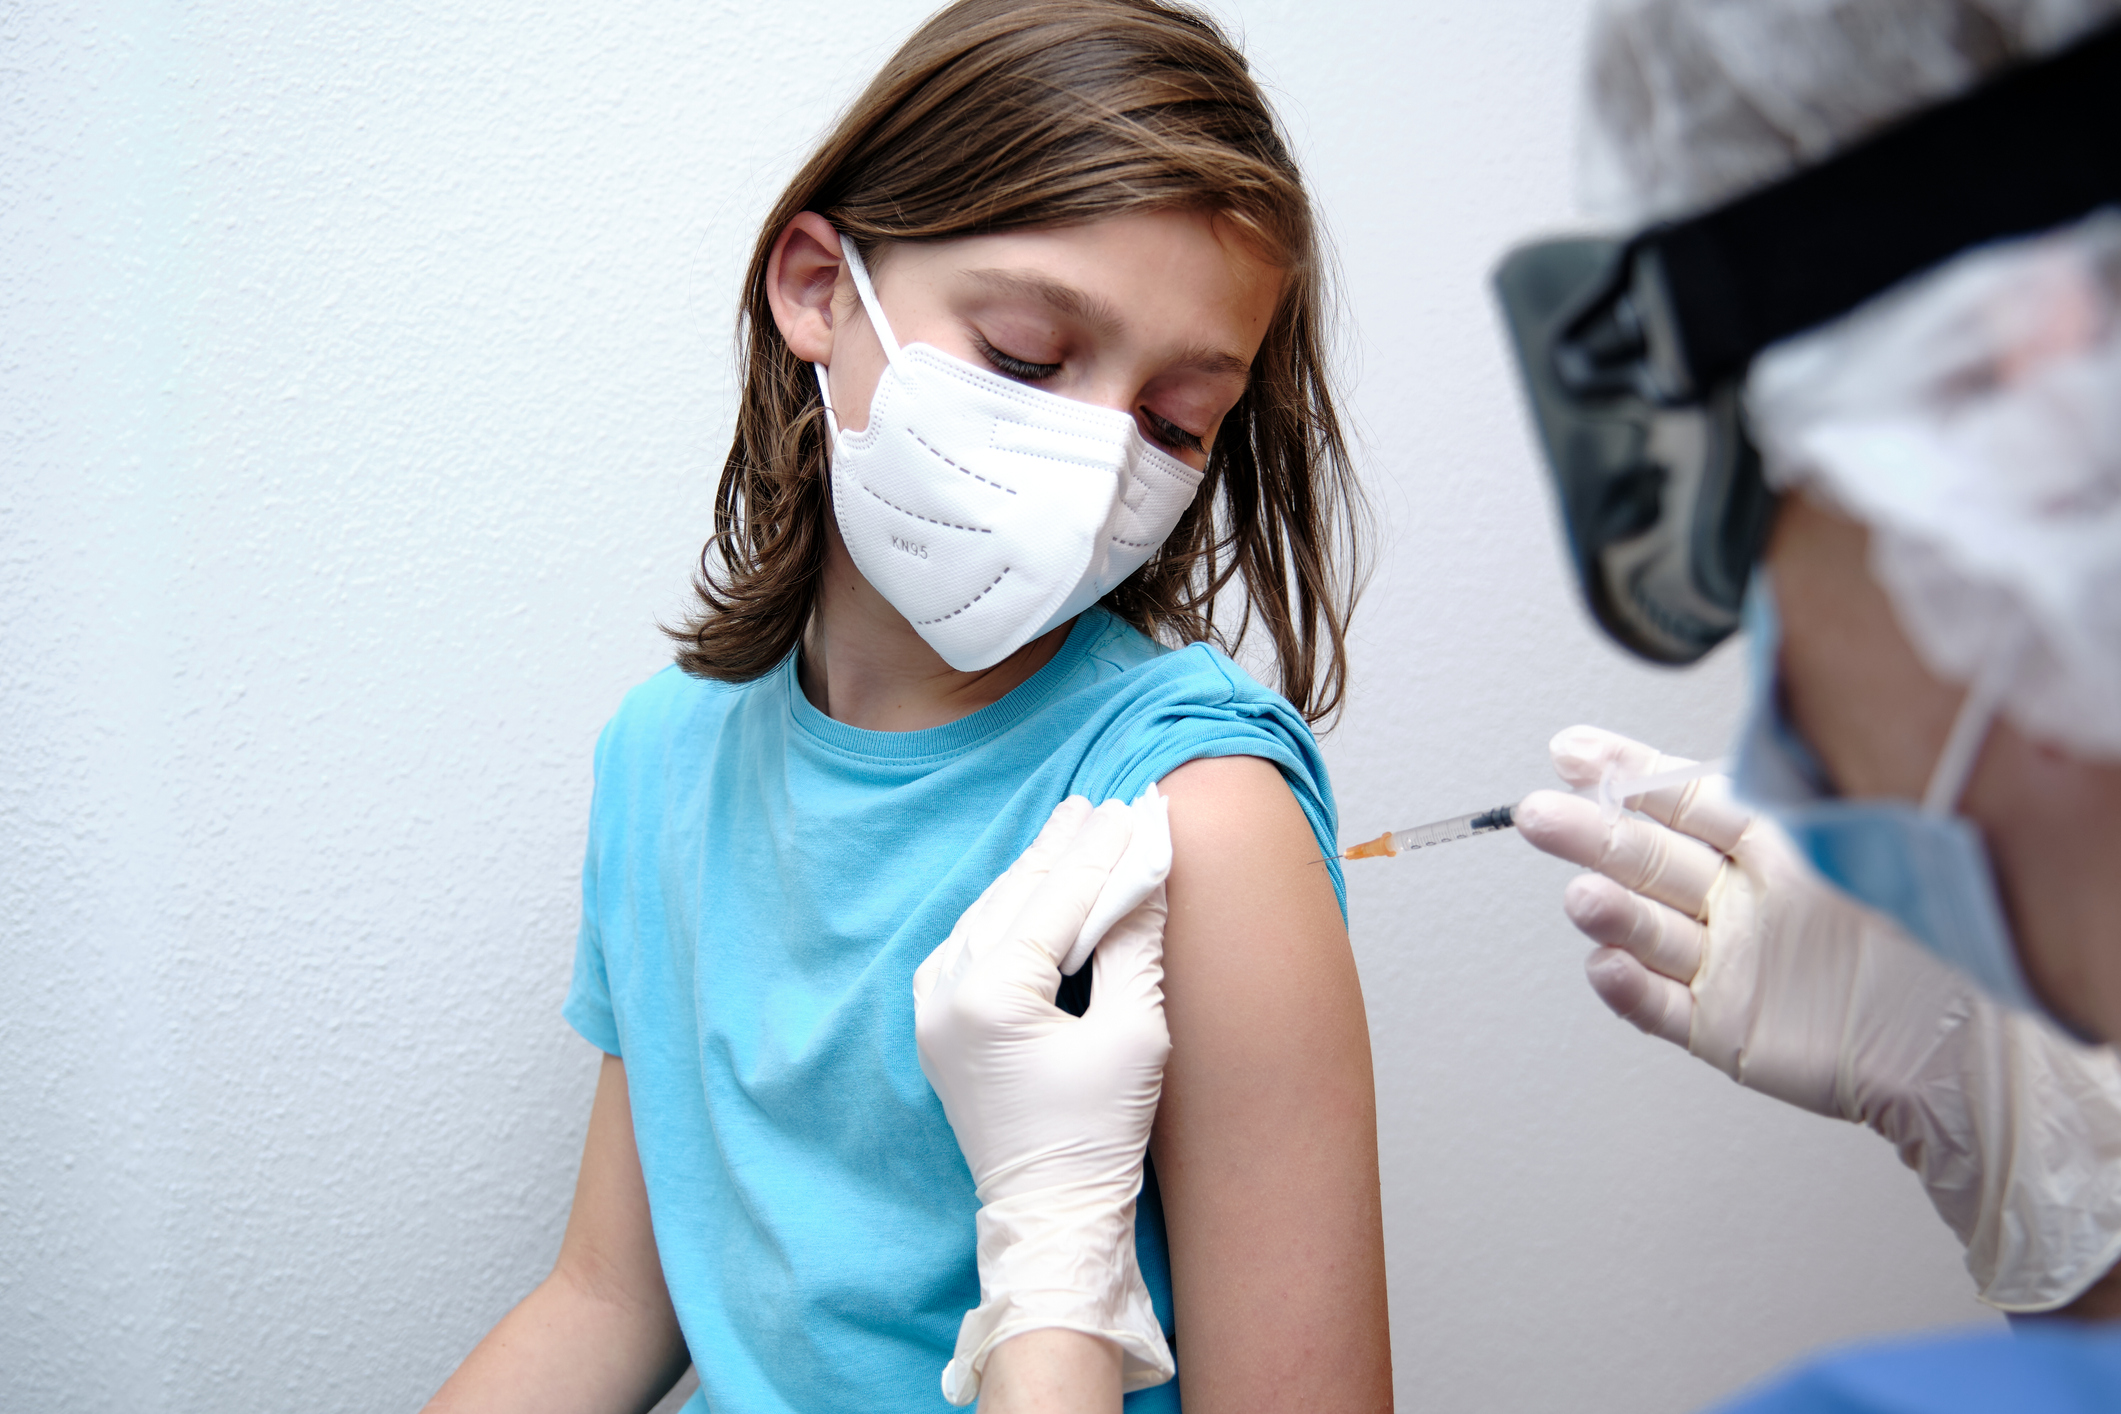 Pfizer will administer the vaccine to children under 12 years of age